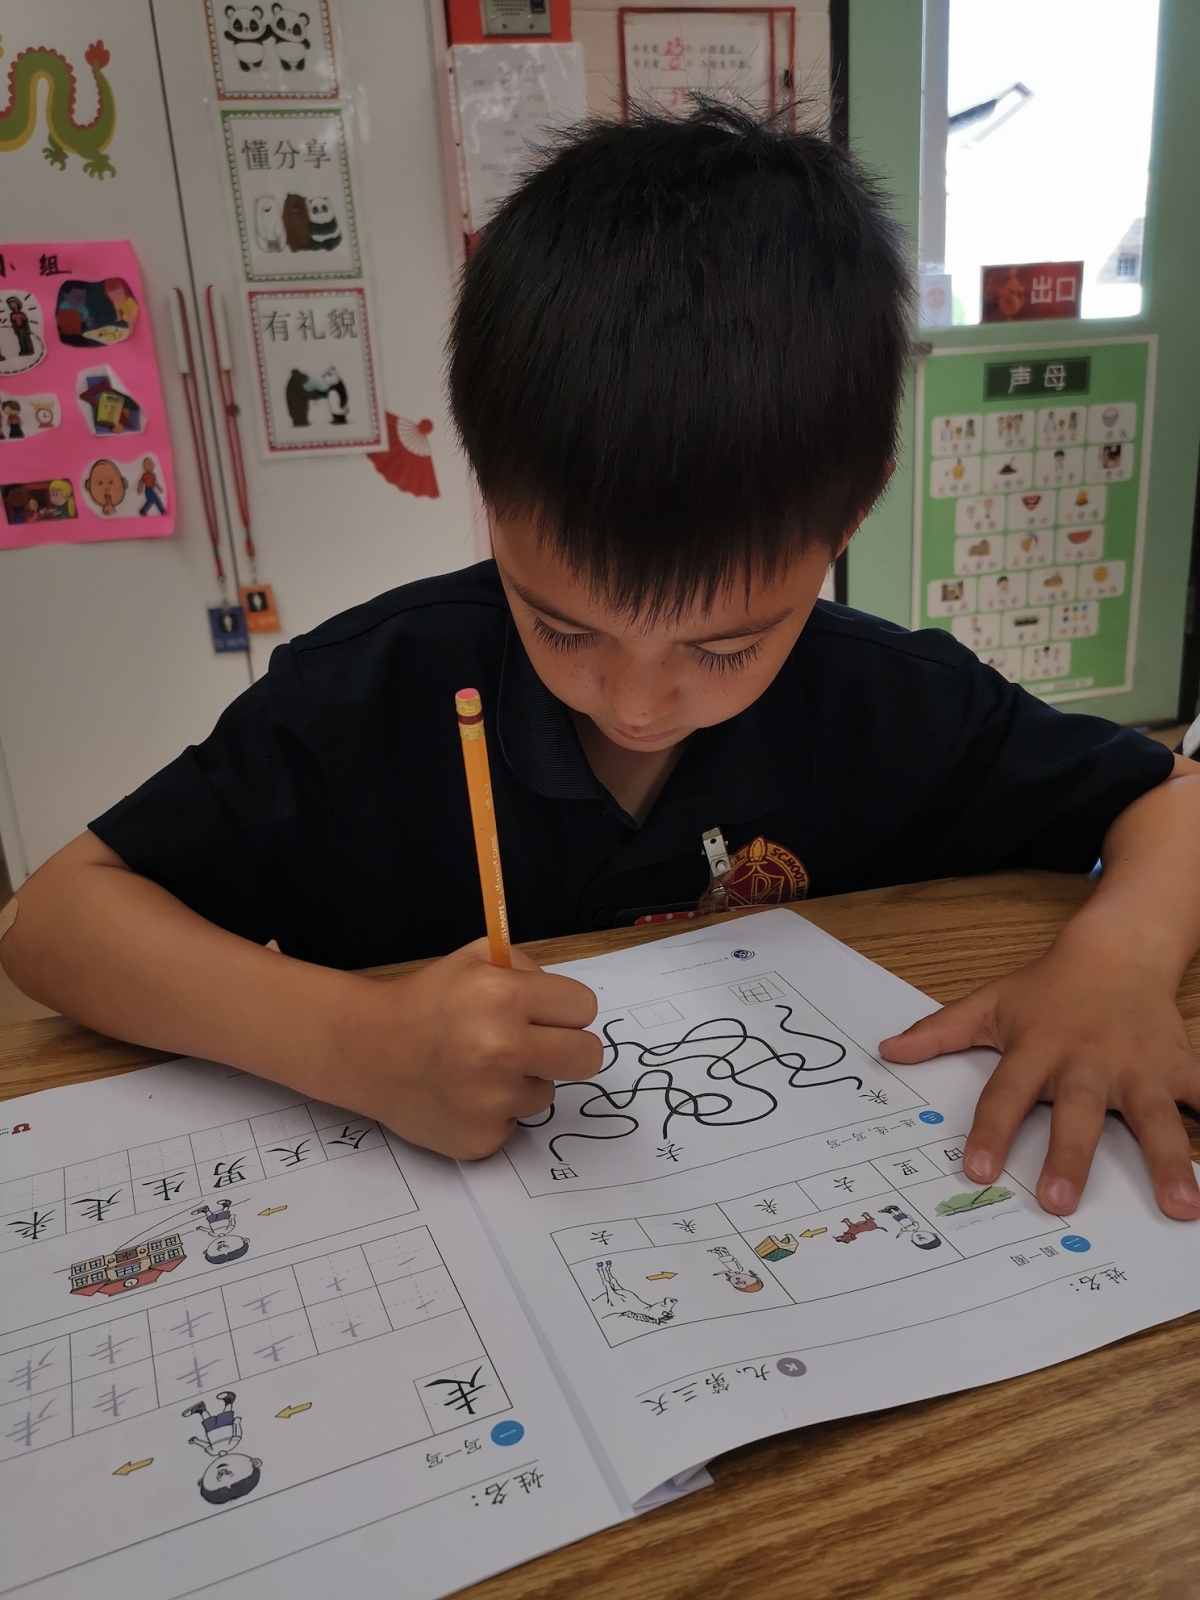 First-grader doing a Chinese worksheet